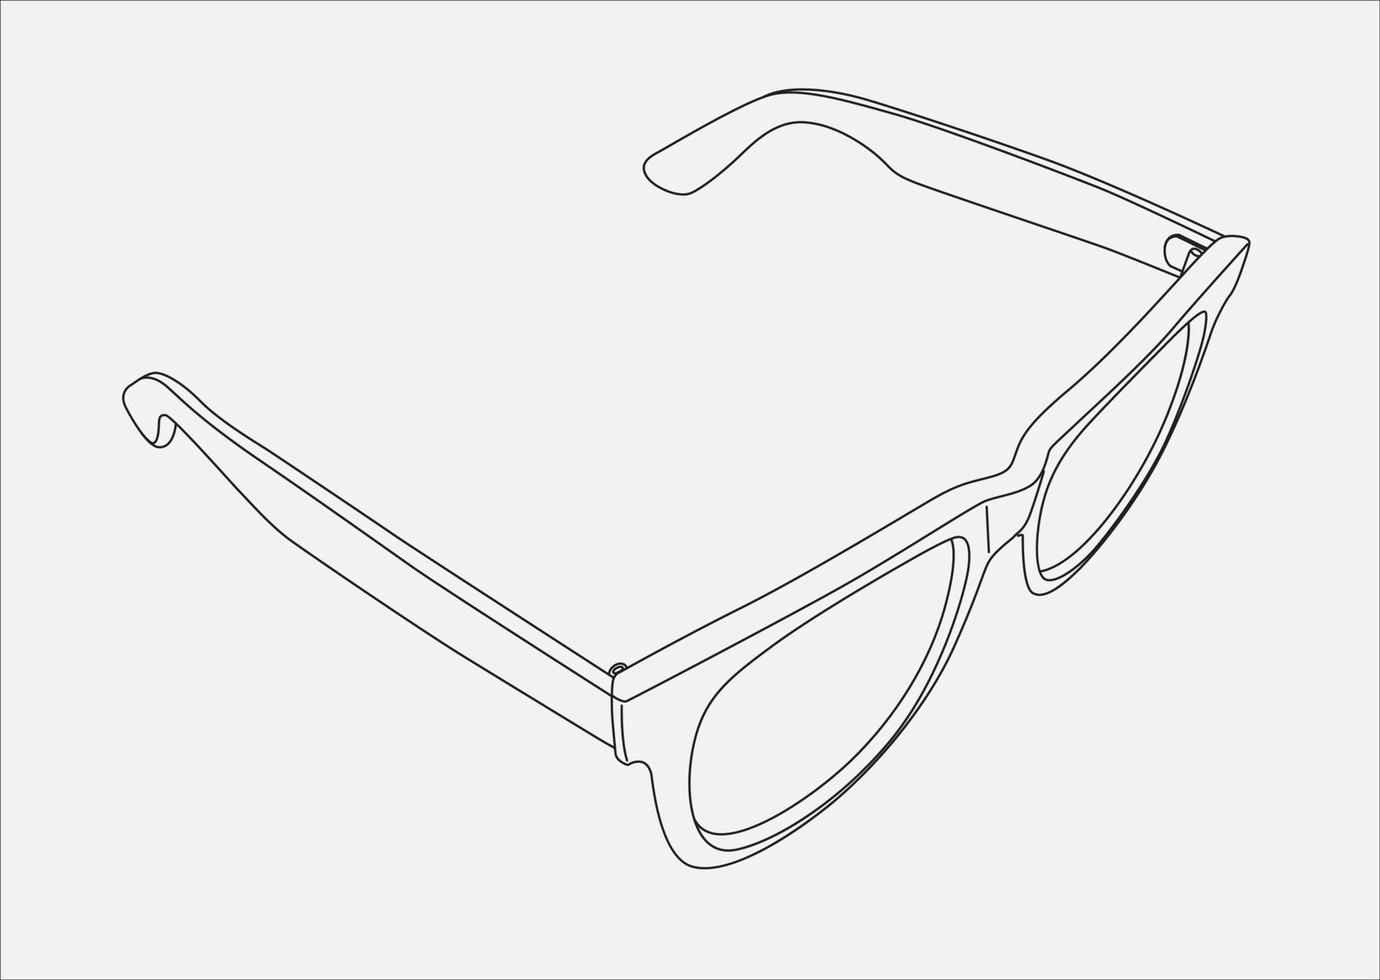 sunglasses hand drawing in vector eps 10